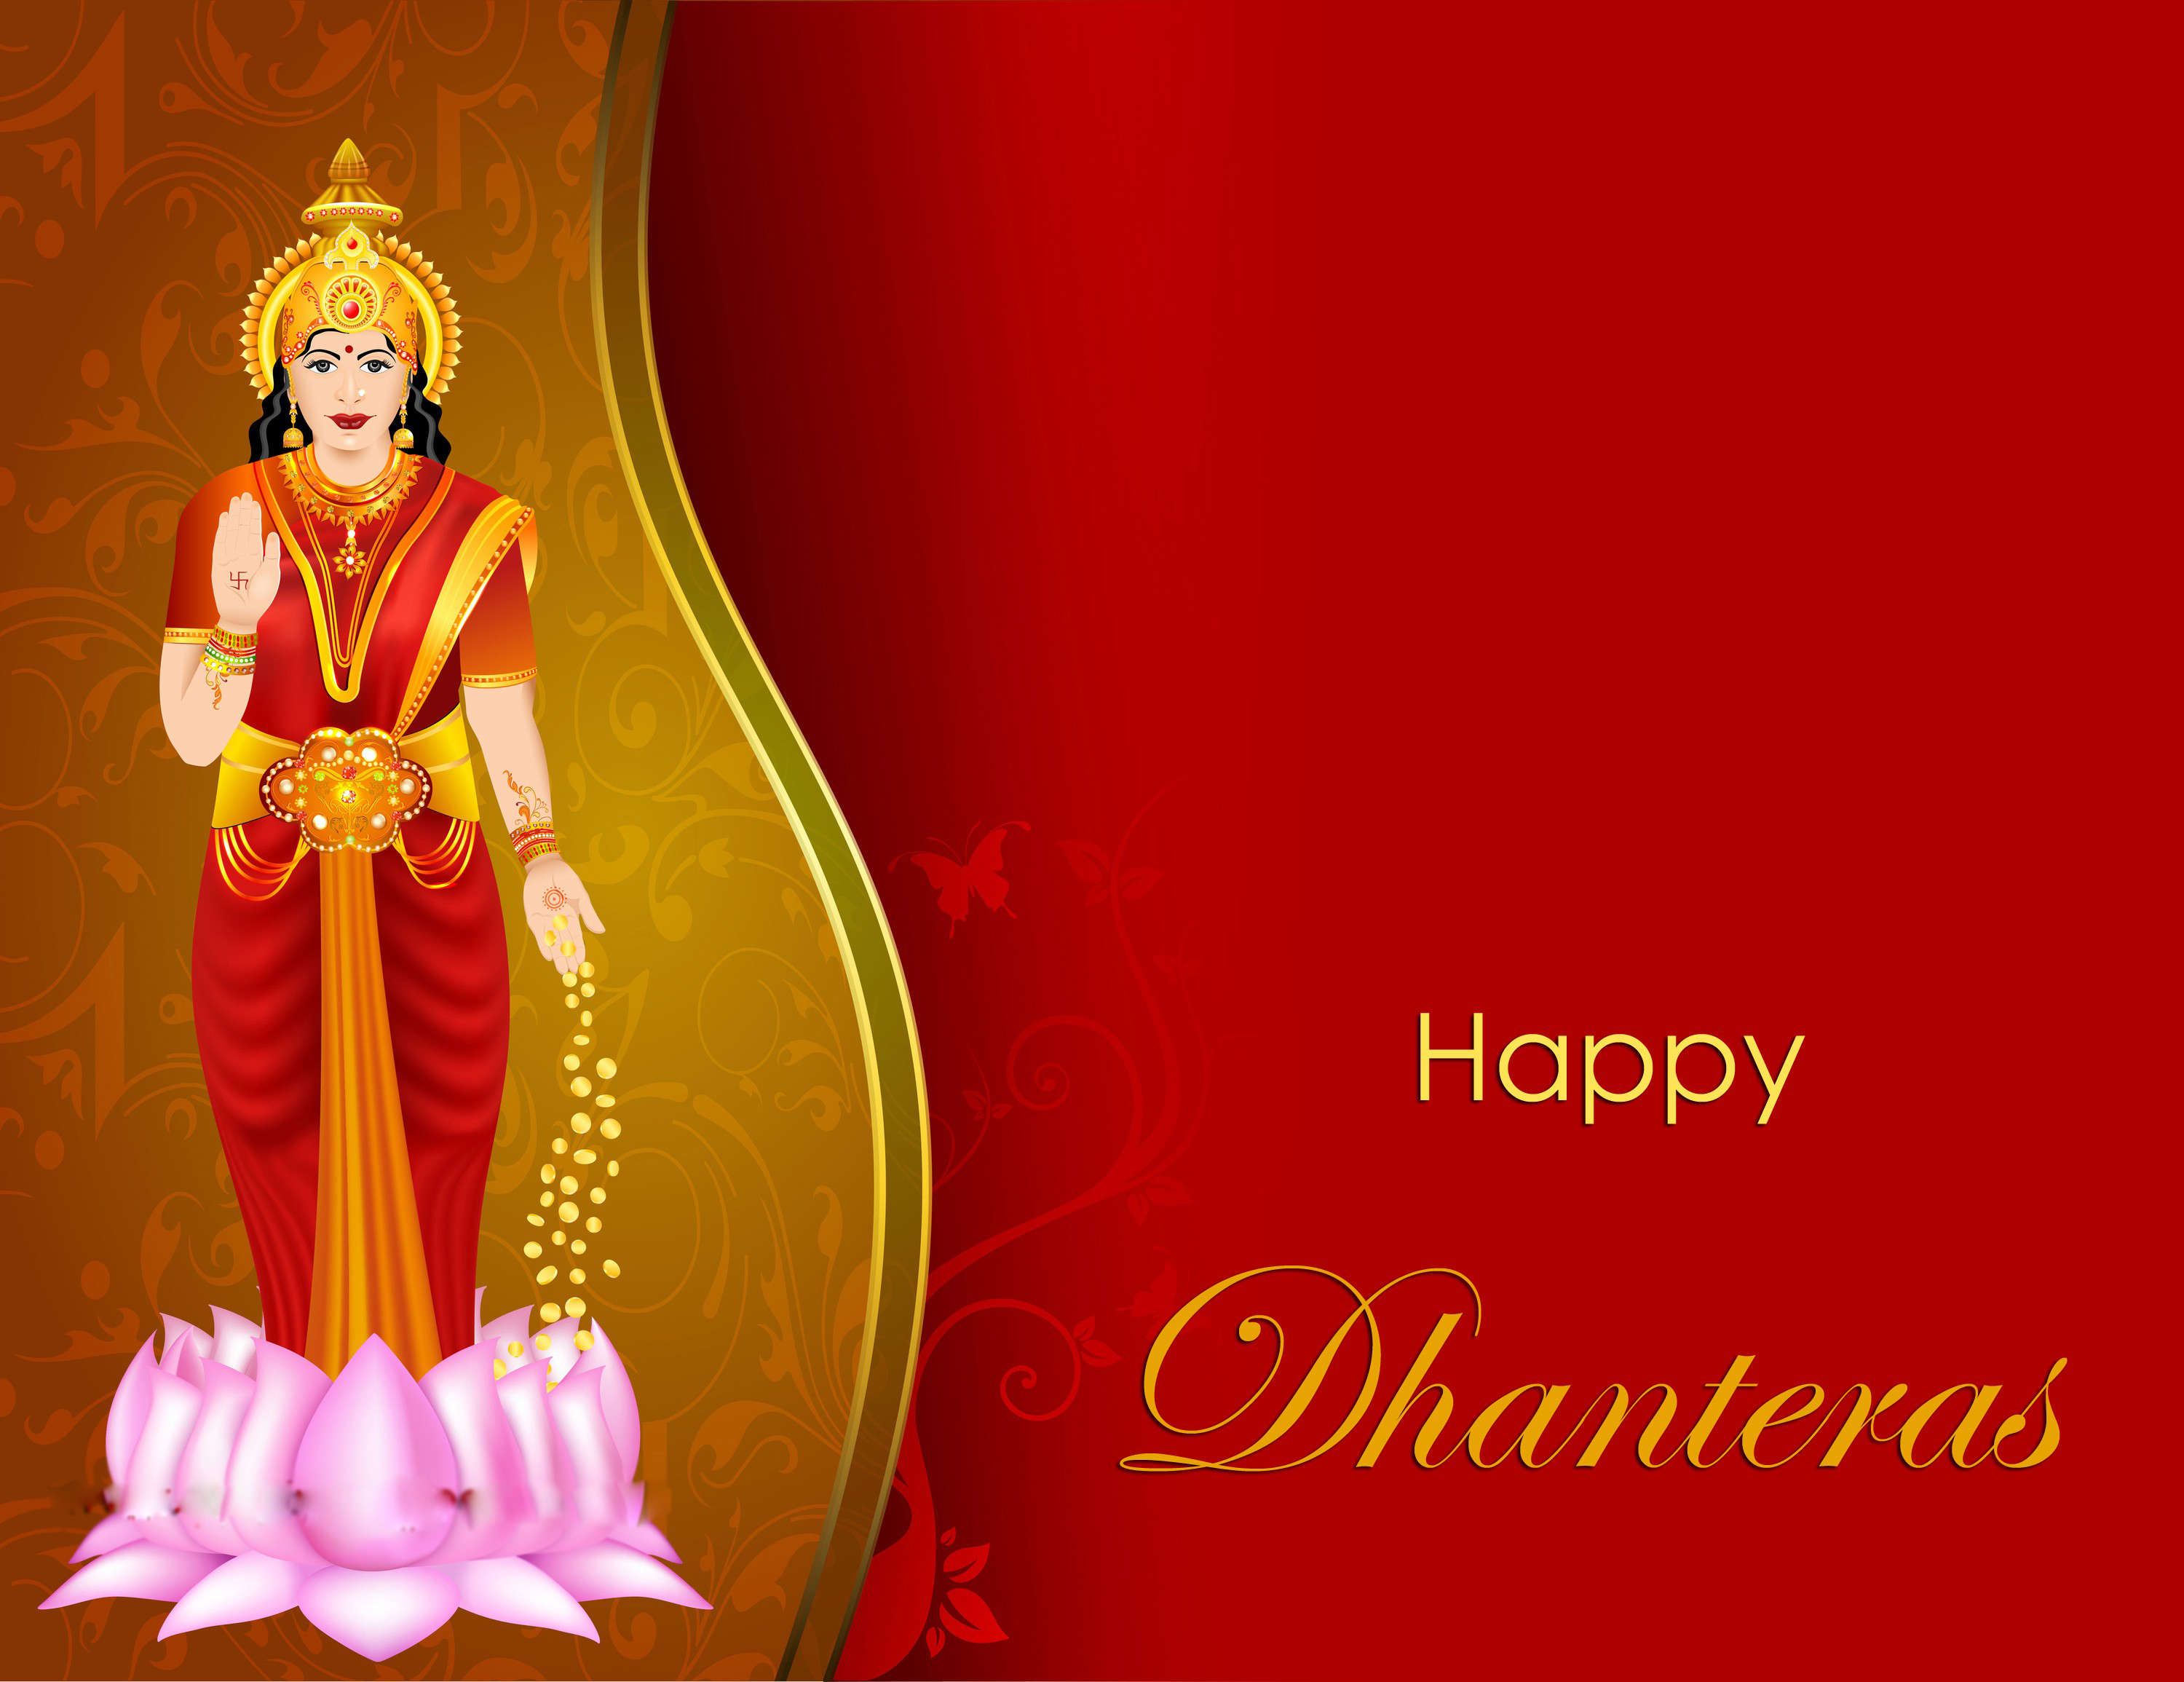 Happy Dhanteras 2020: Image, Quotes, Wishes, Messages, Cards, Greetings, Picture and GIFs of India